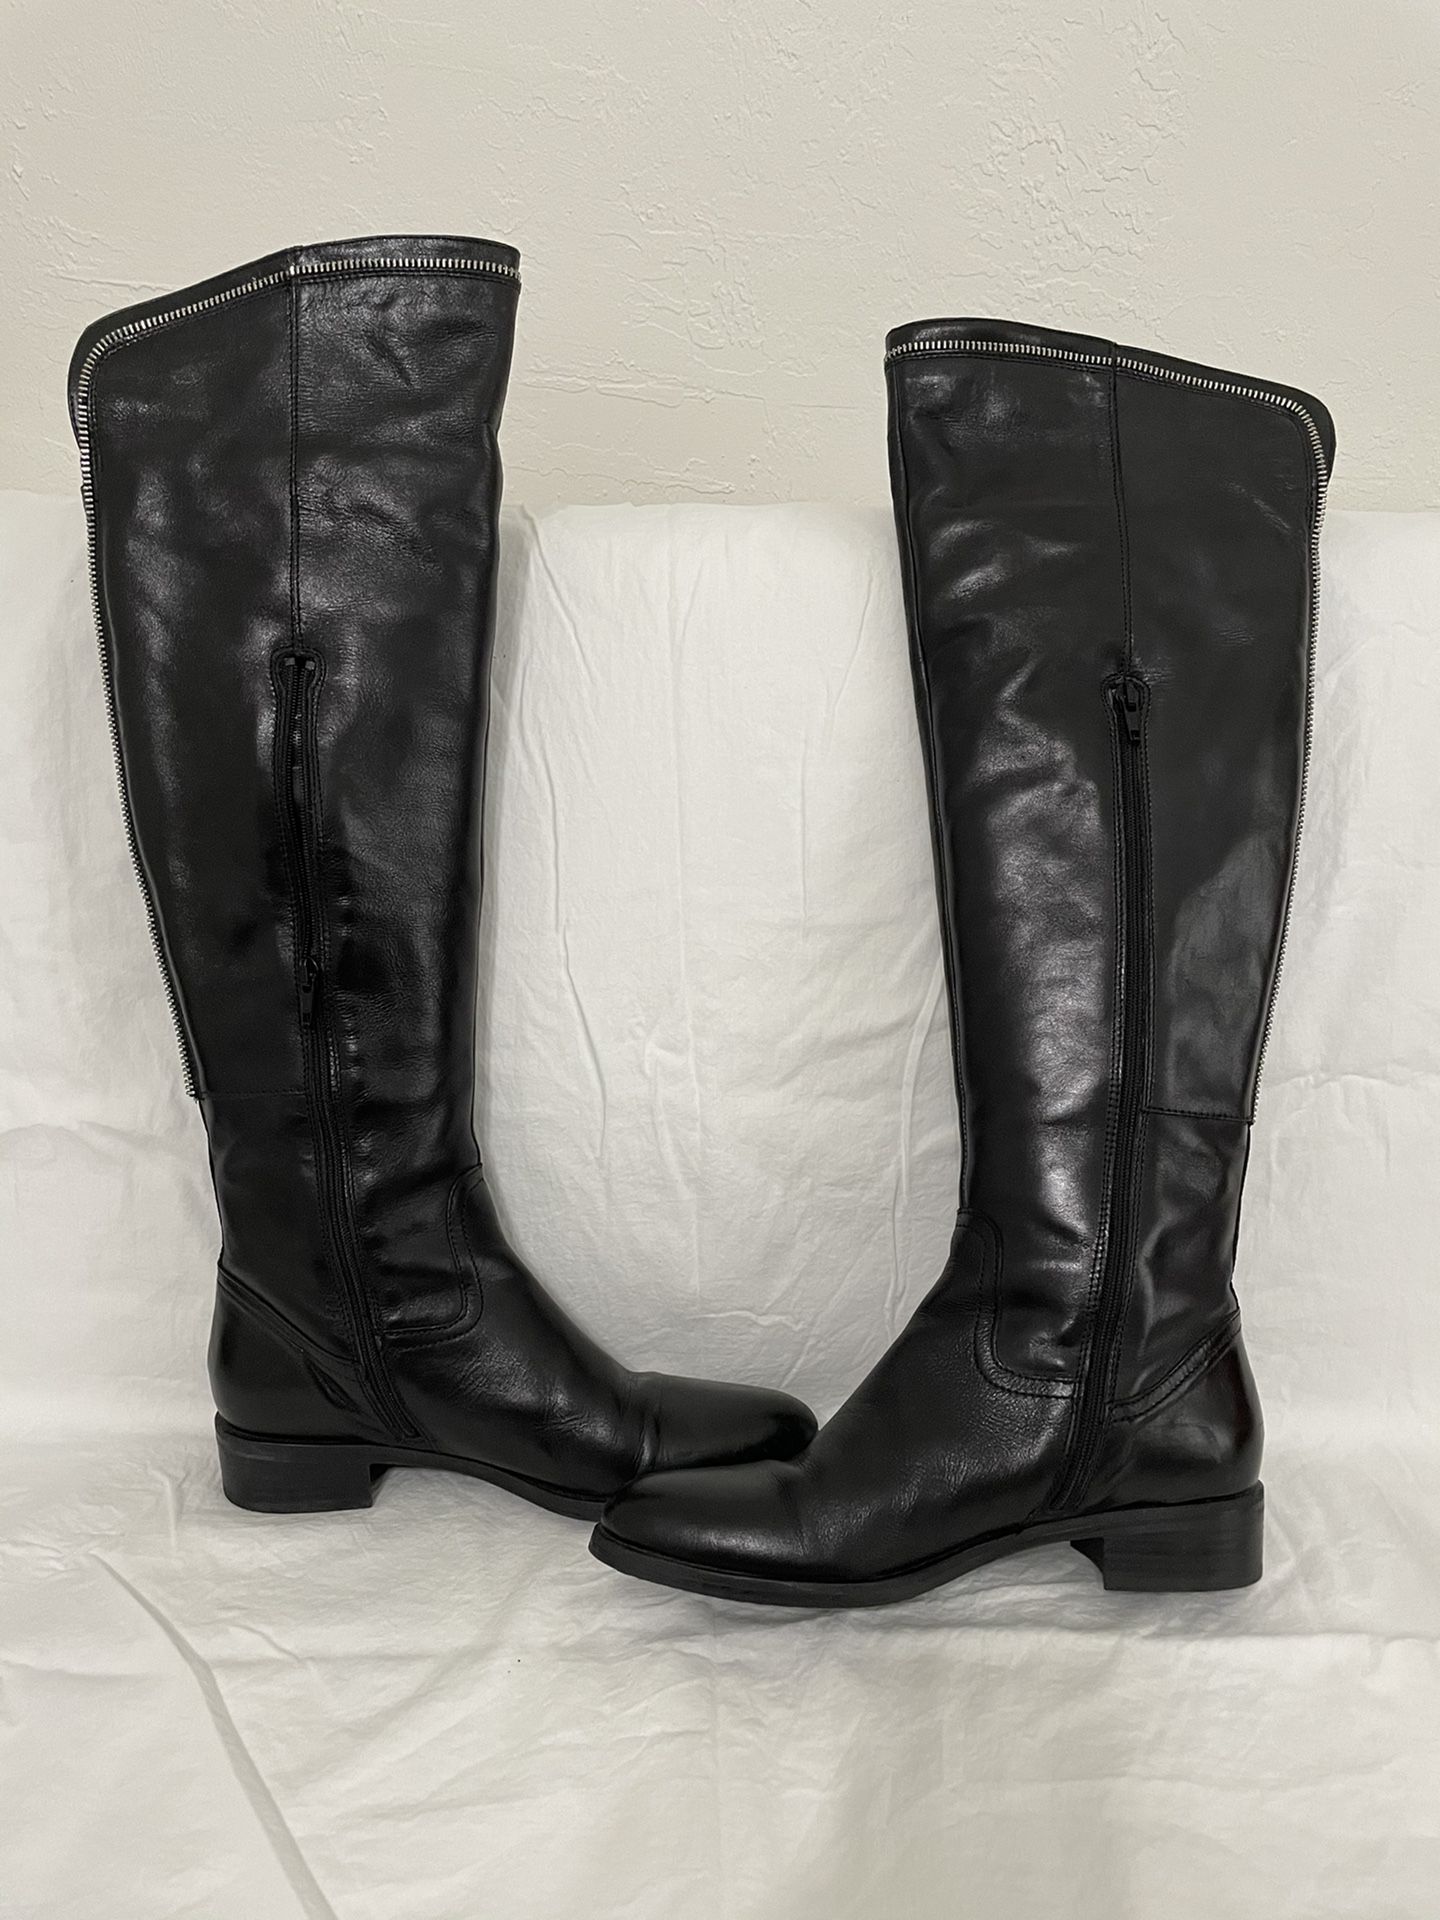 Boots - Women’s Leather Boots